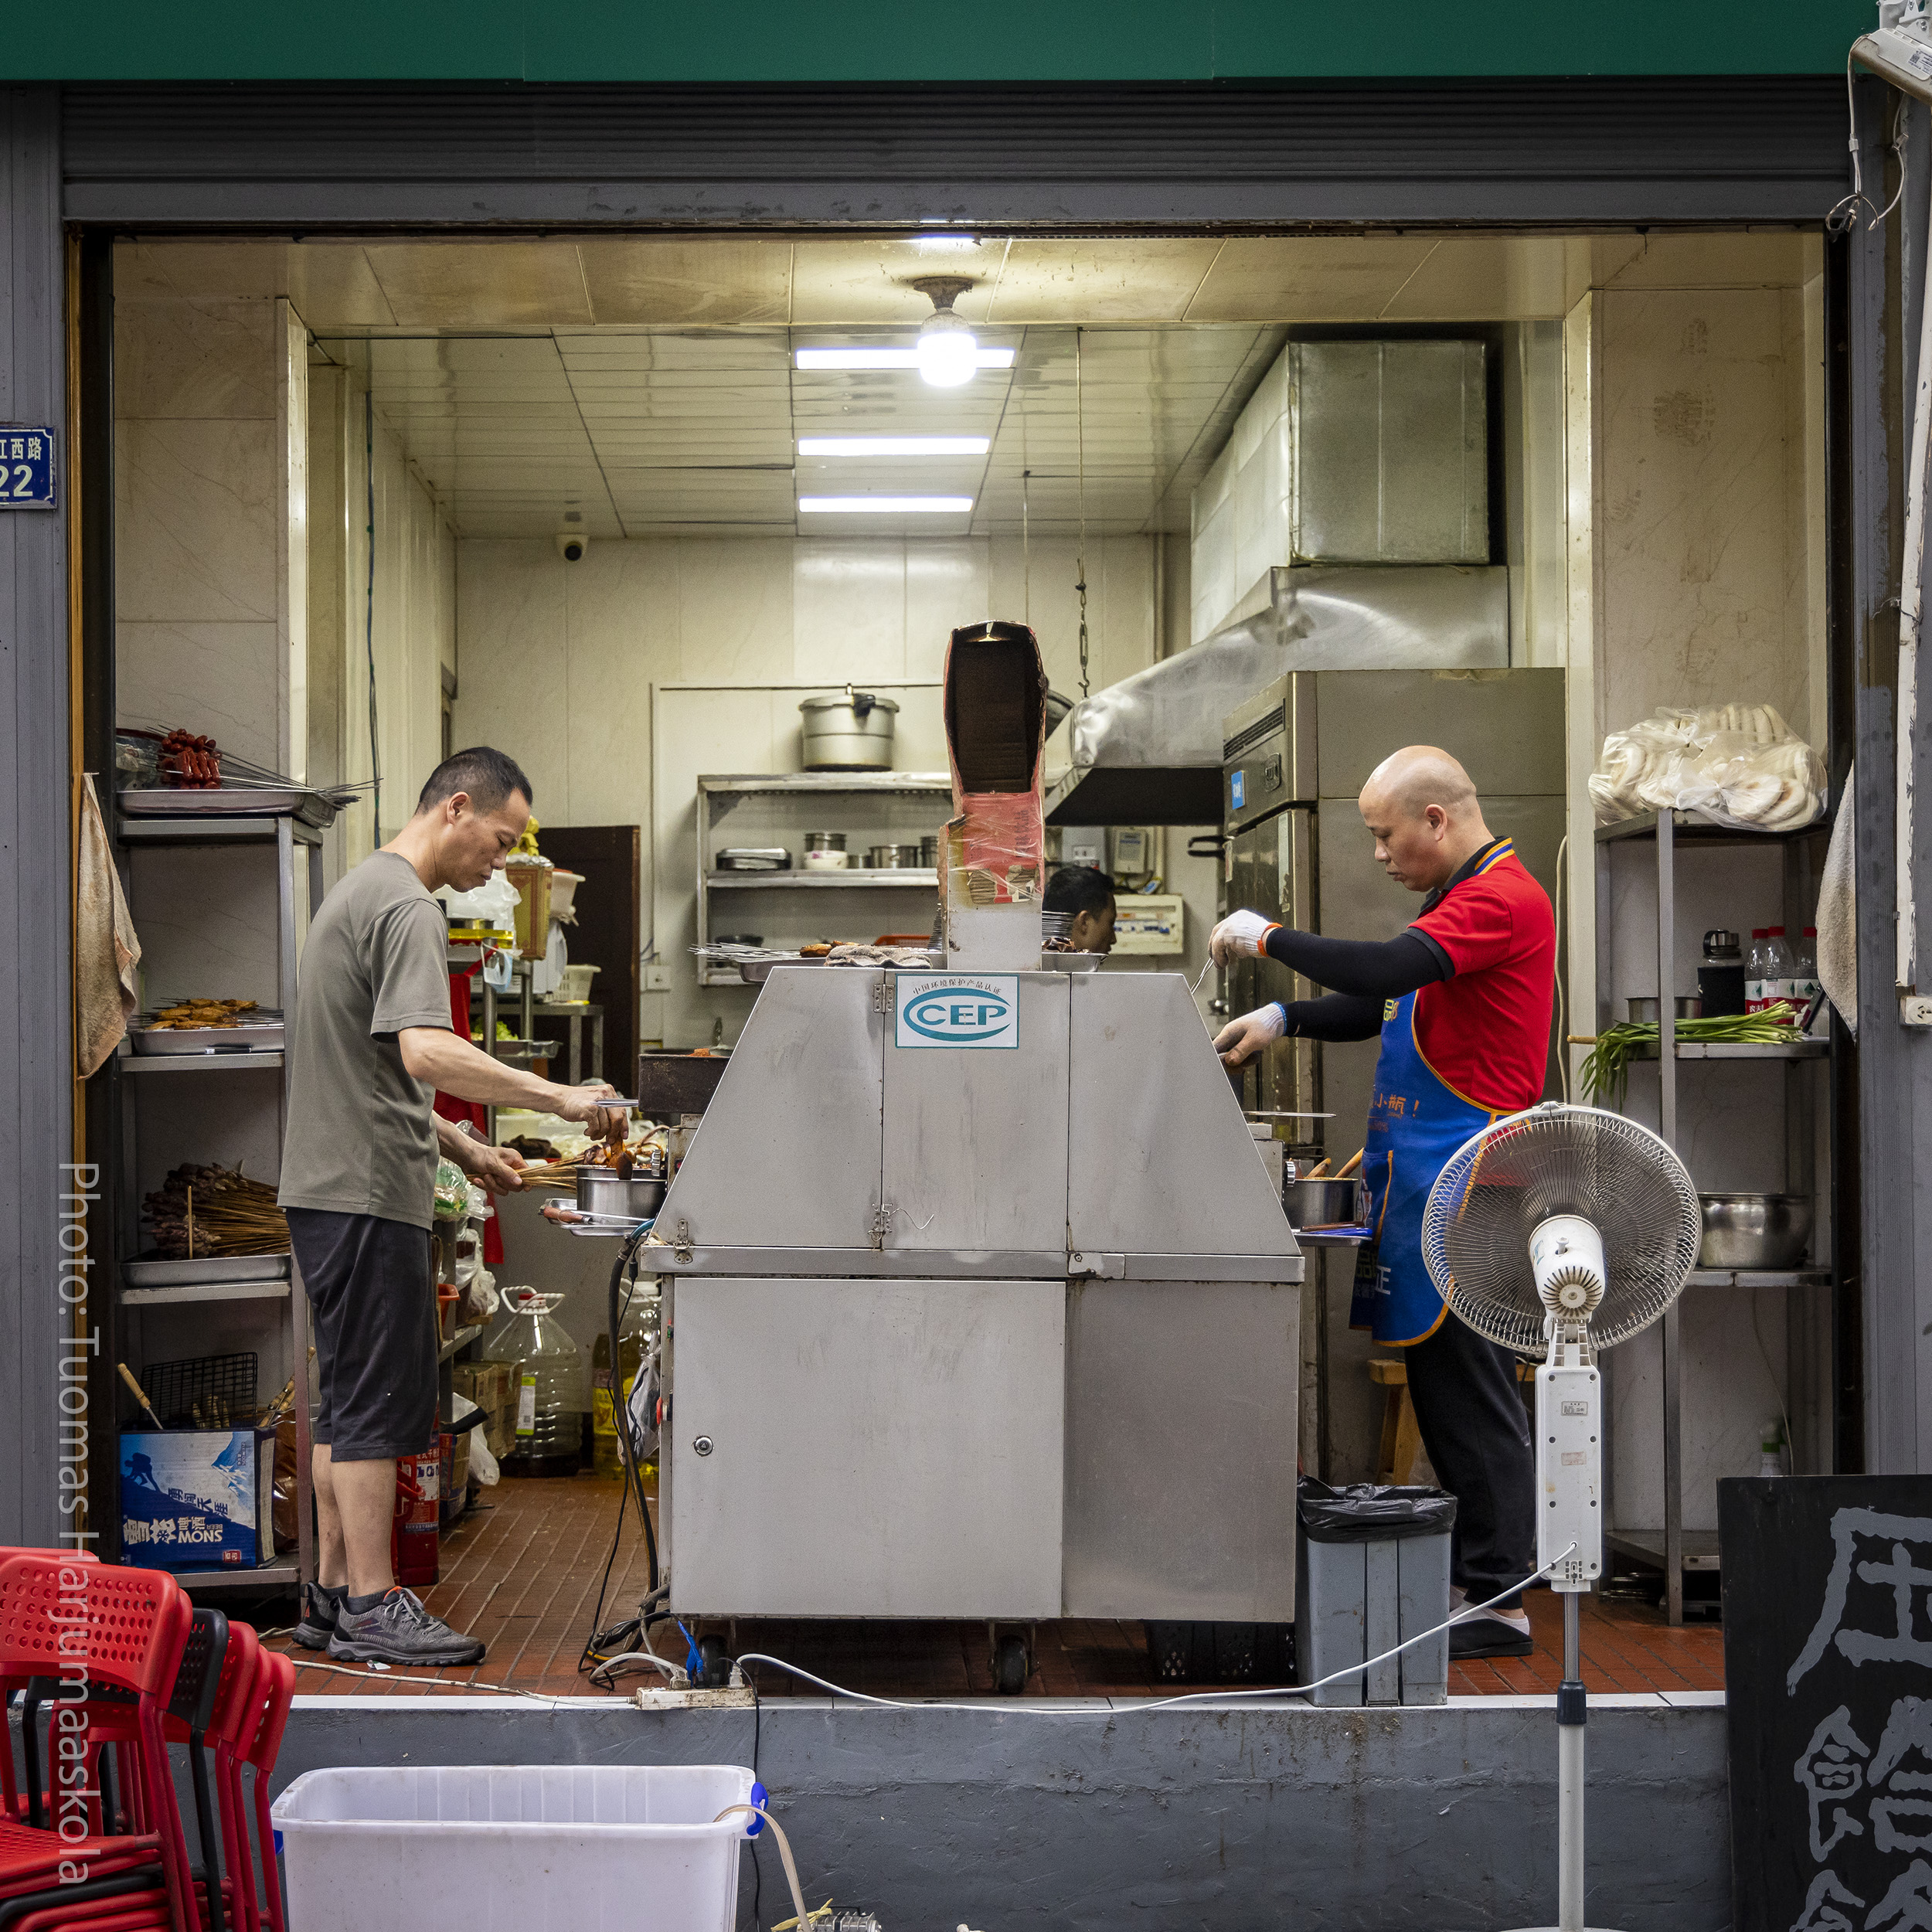 Chinese restaurant’s kitchen, view from street, two chefs cooking. Photographer Tuomas Harjumaaskola.